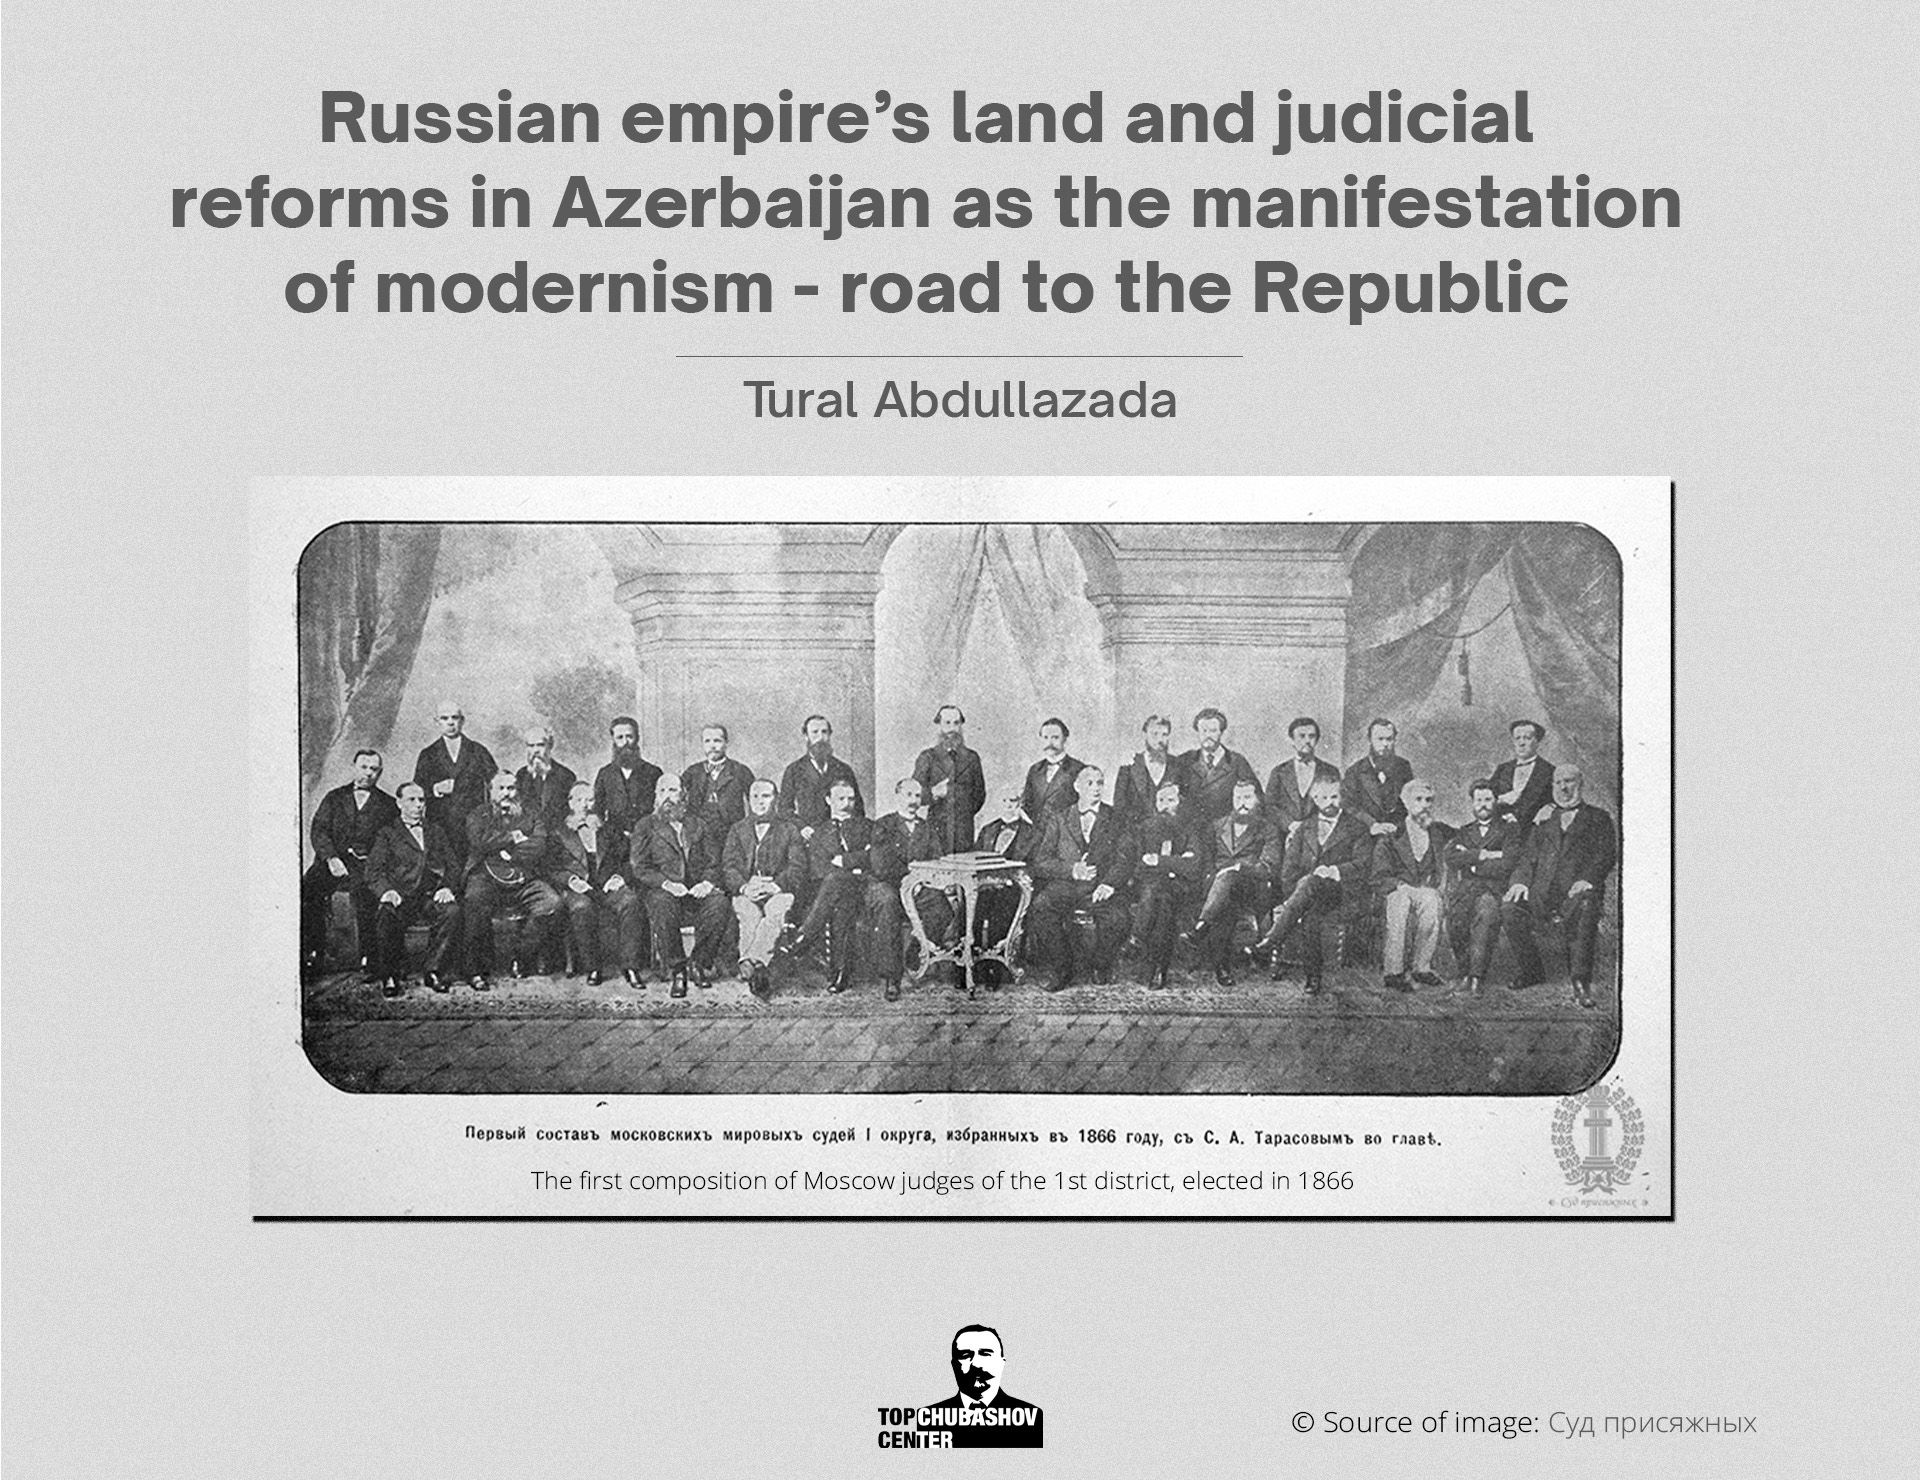 Russian empire’s land and judicial reforms in Azerbaijan as the manifestation of modernism - road to the Republic